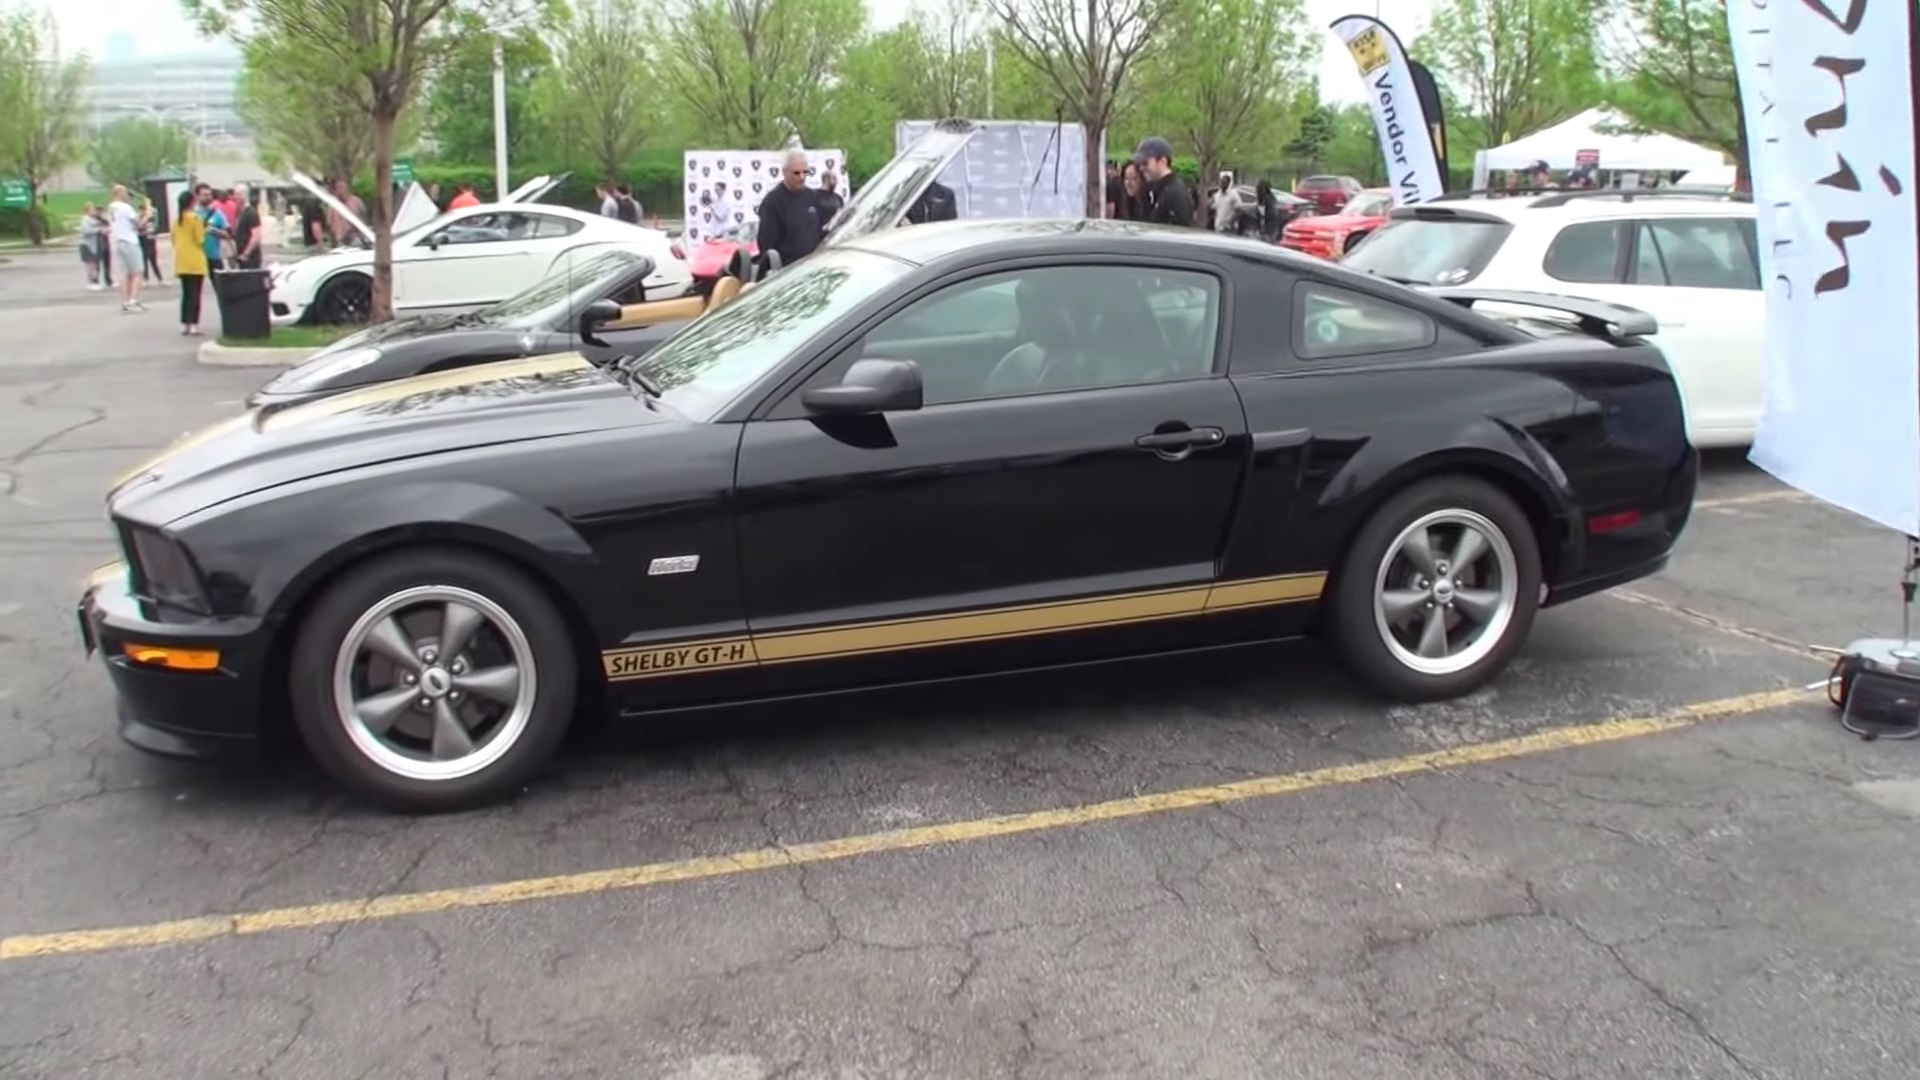 Video: 2006 Ford Mustang Shelby GT Hertz Overview